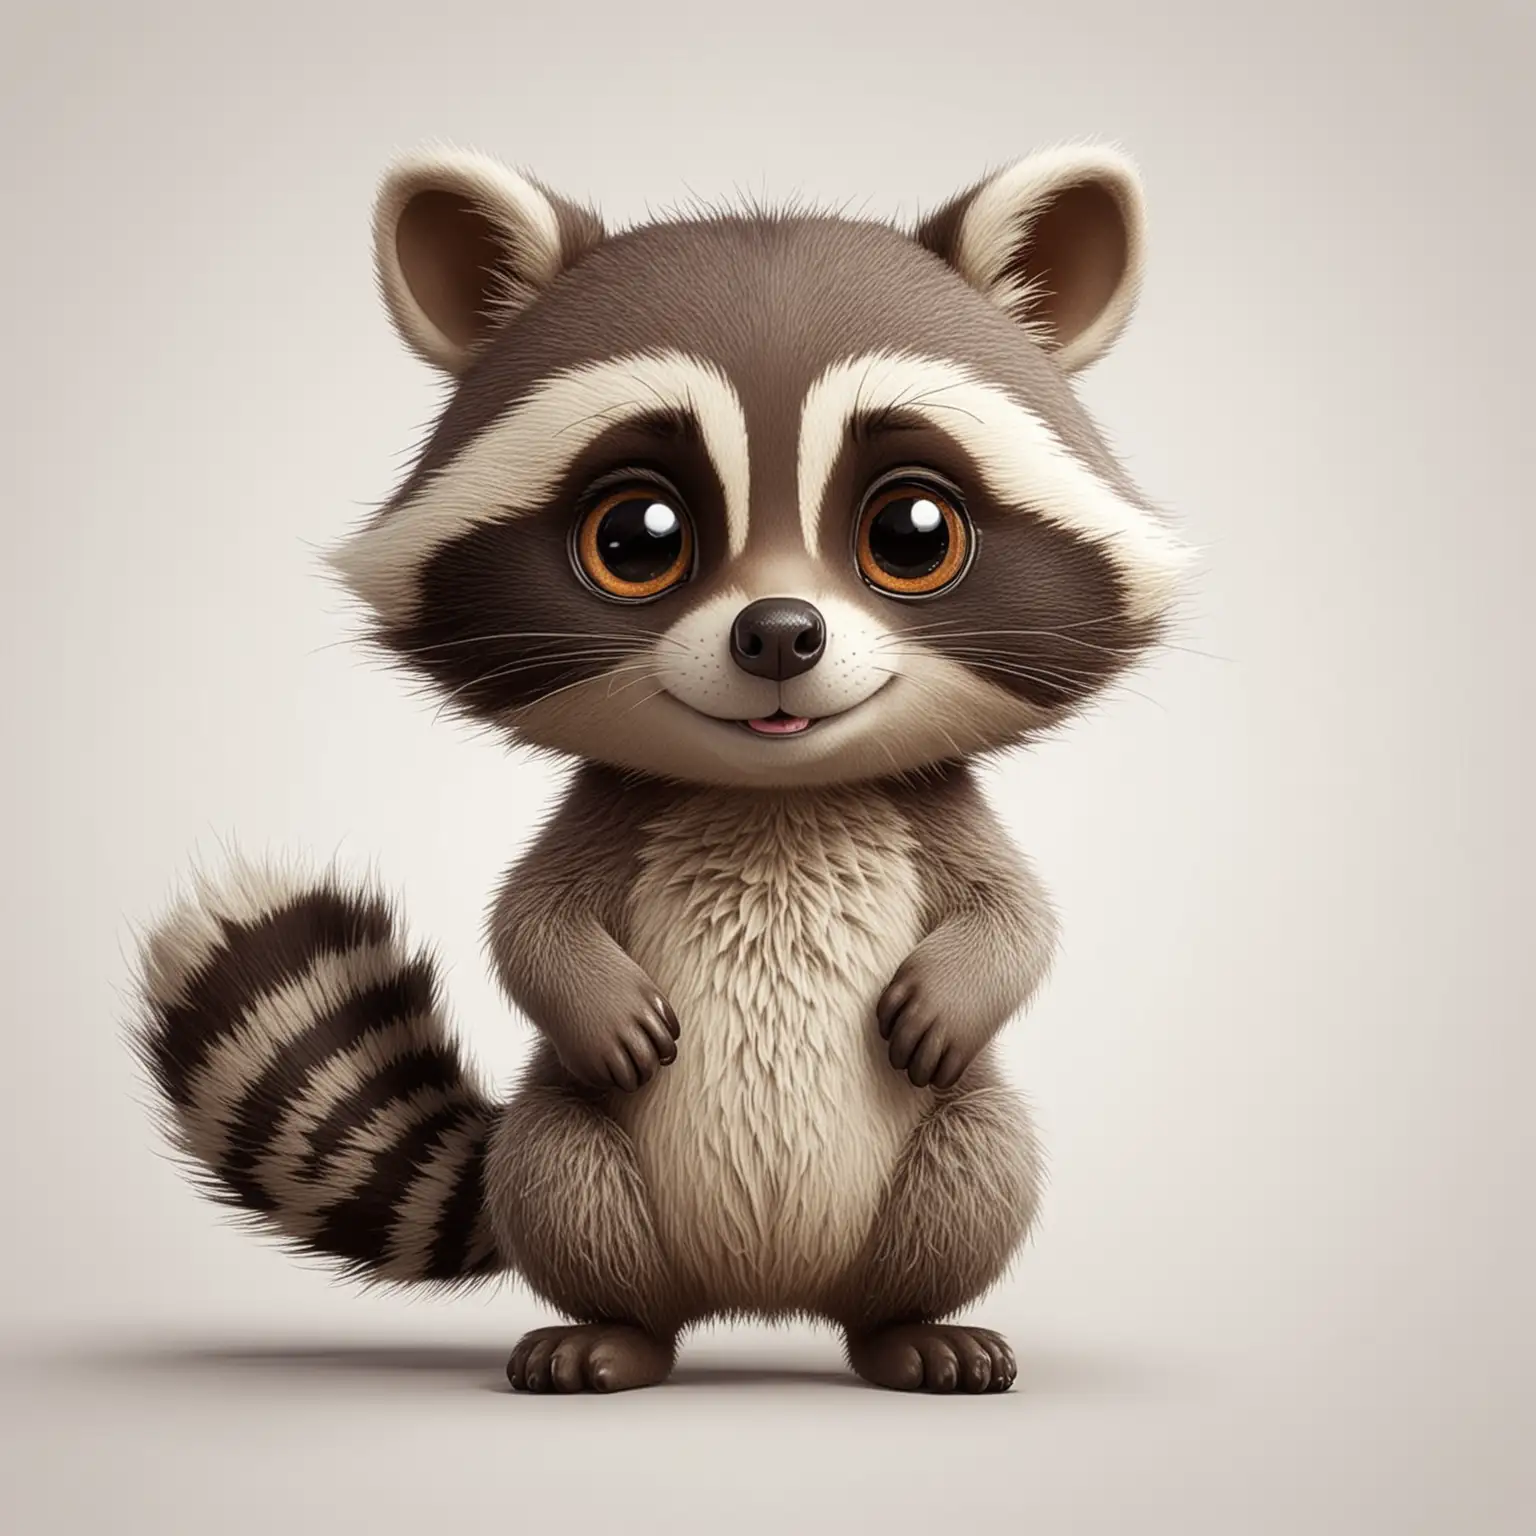 CUTE RACOON CARTOON, FUNNY, WHITE BACKGROUND